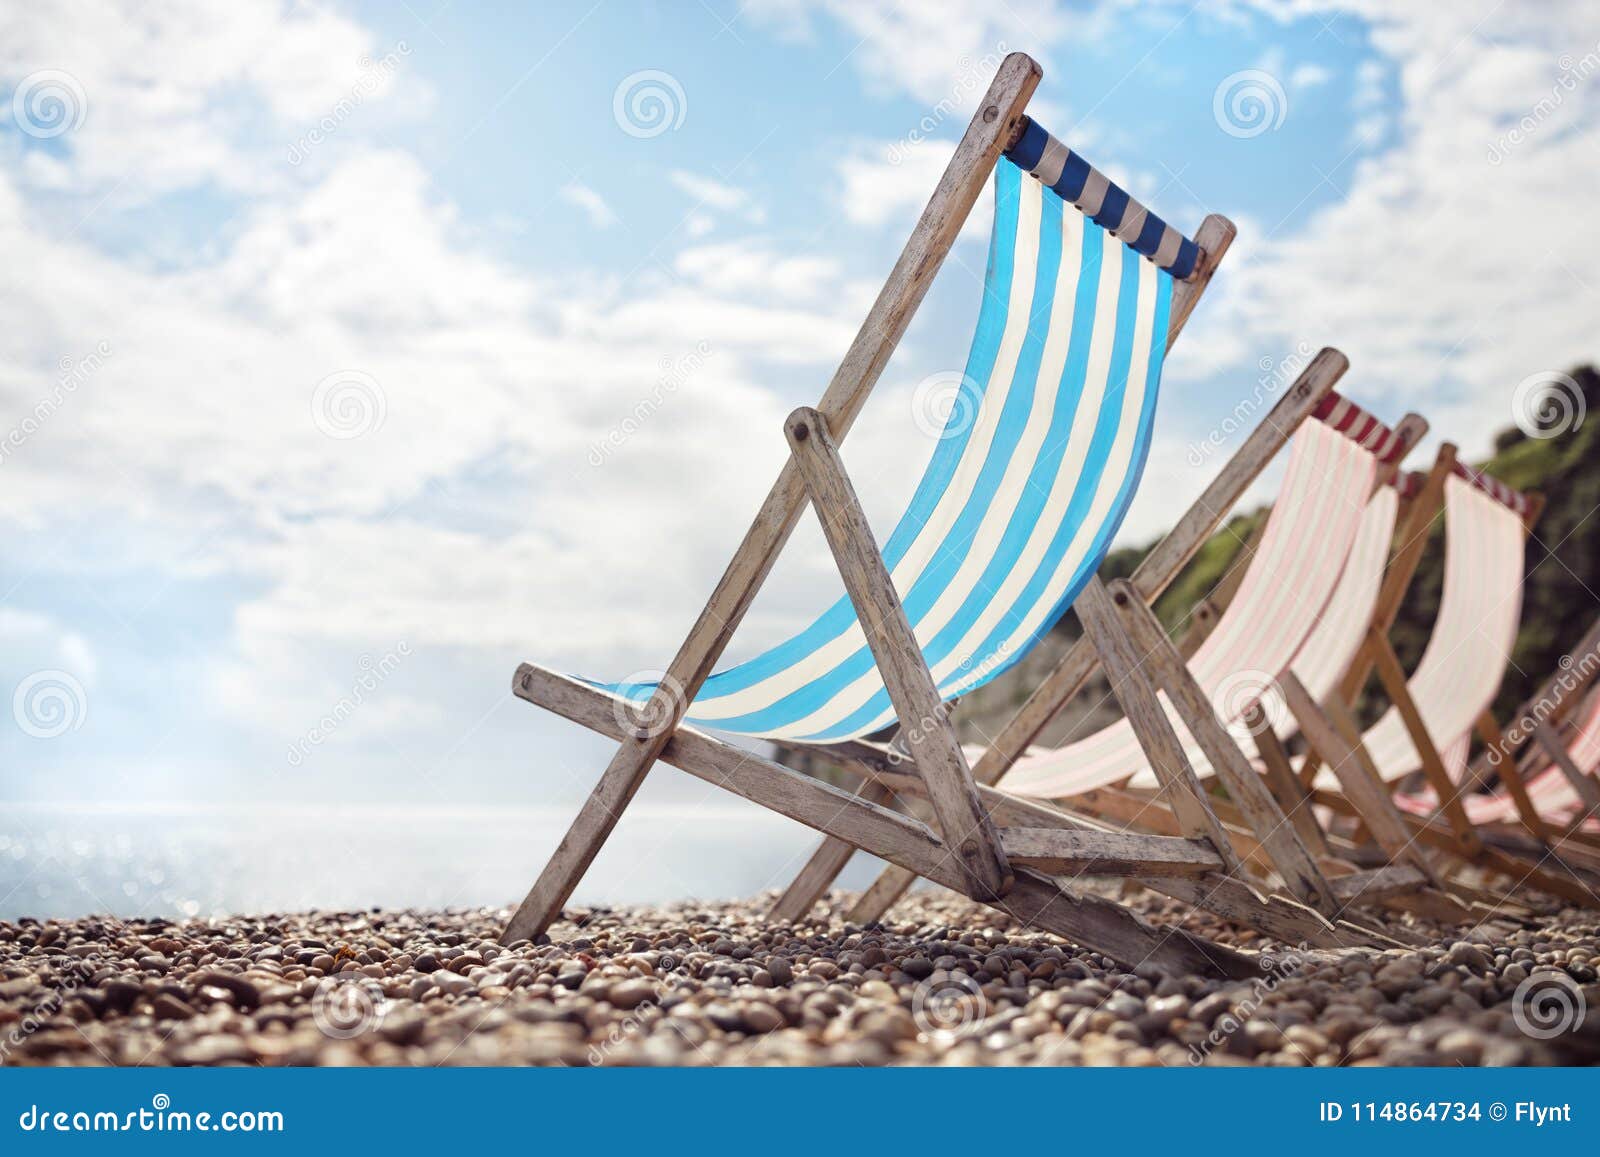 summer vacation deck chairs on the beach at the seaside